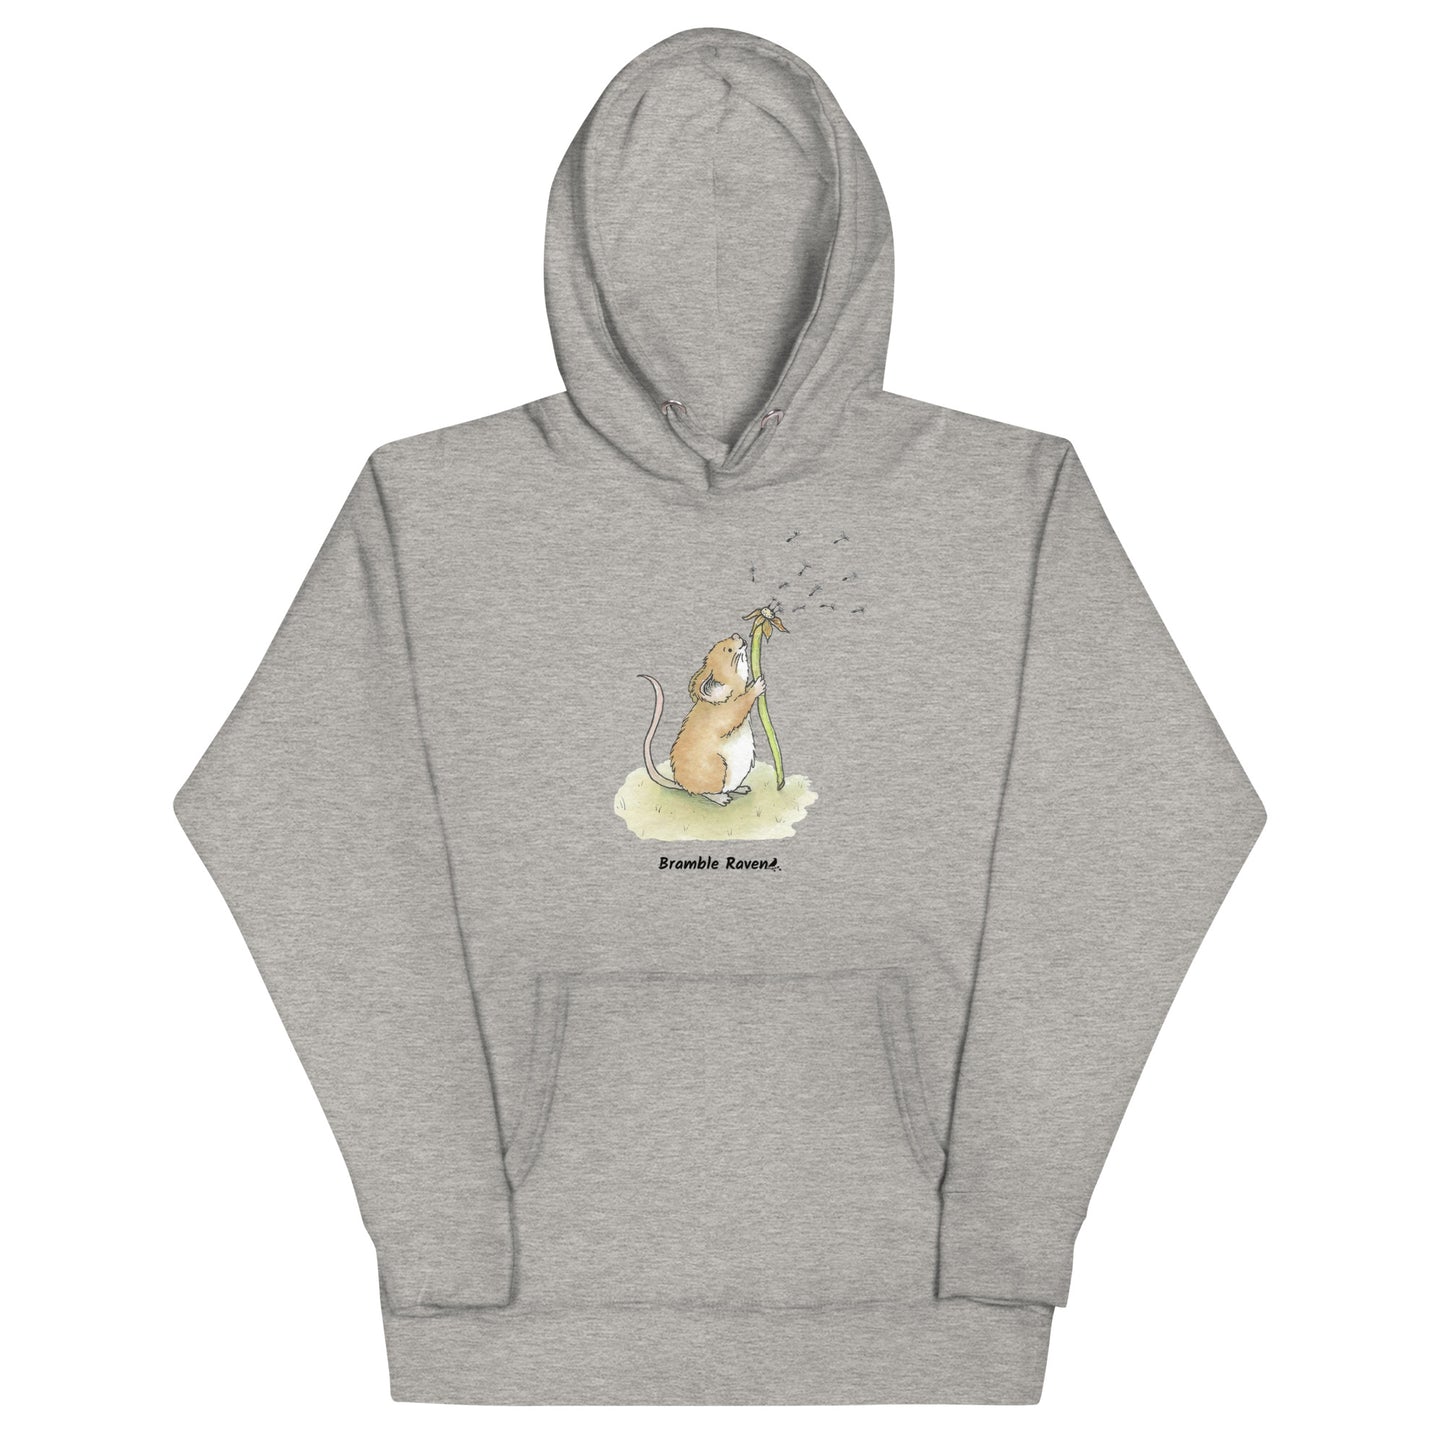 Original Dandelion wish design of cute watercolor mouse blowing dandelion seeds  featured on unisex carbon grey colored hoodie.